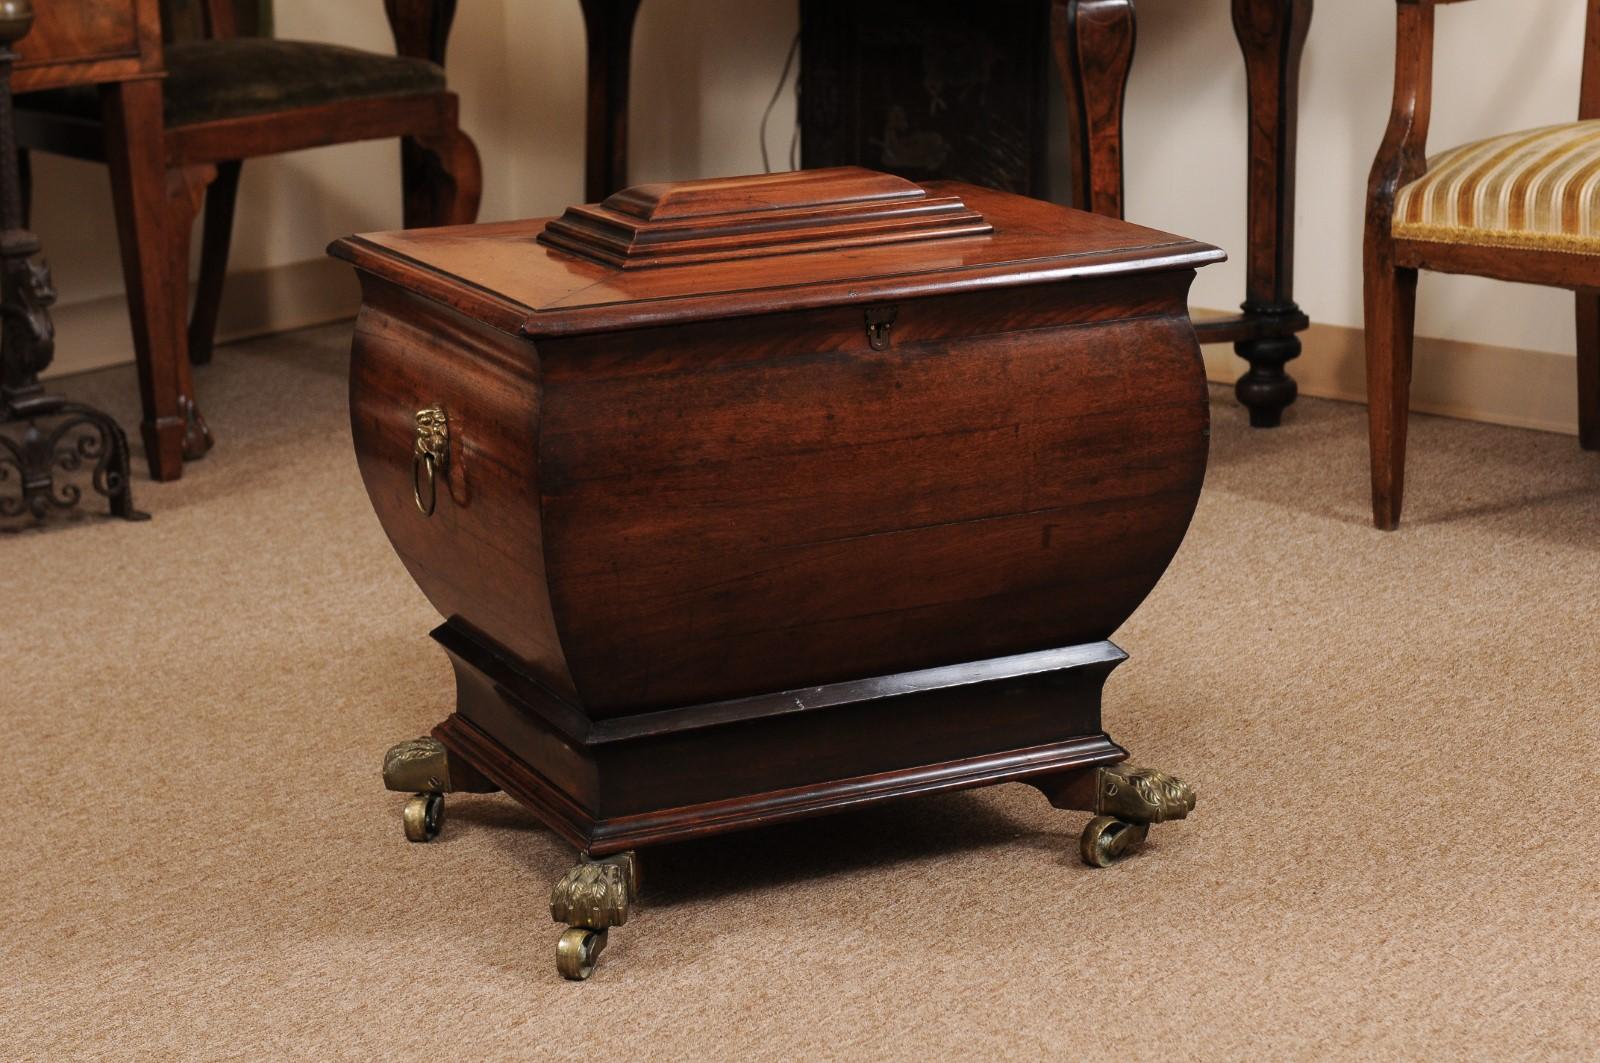 The English Regency mahogany cellarette with convex form, lion head brass pulls and brass paw feet on castors. 

 